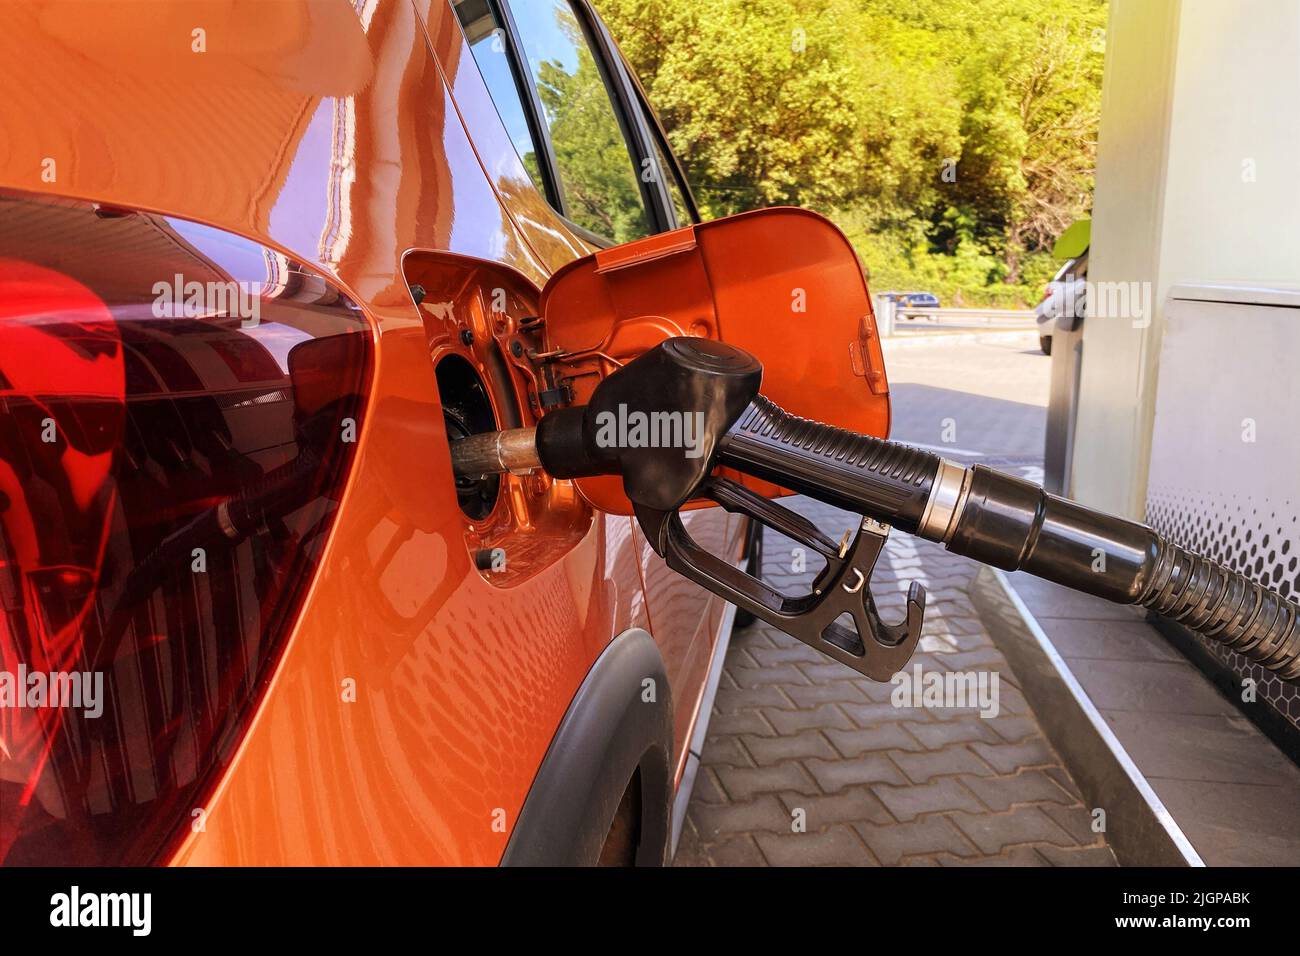 Fill car with fuel in petrol station. Pumping gasoline fuel in orange car at a gas station. Close up. Stock Photo